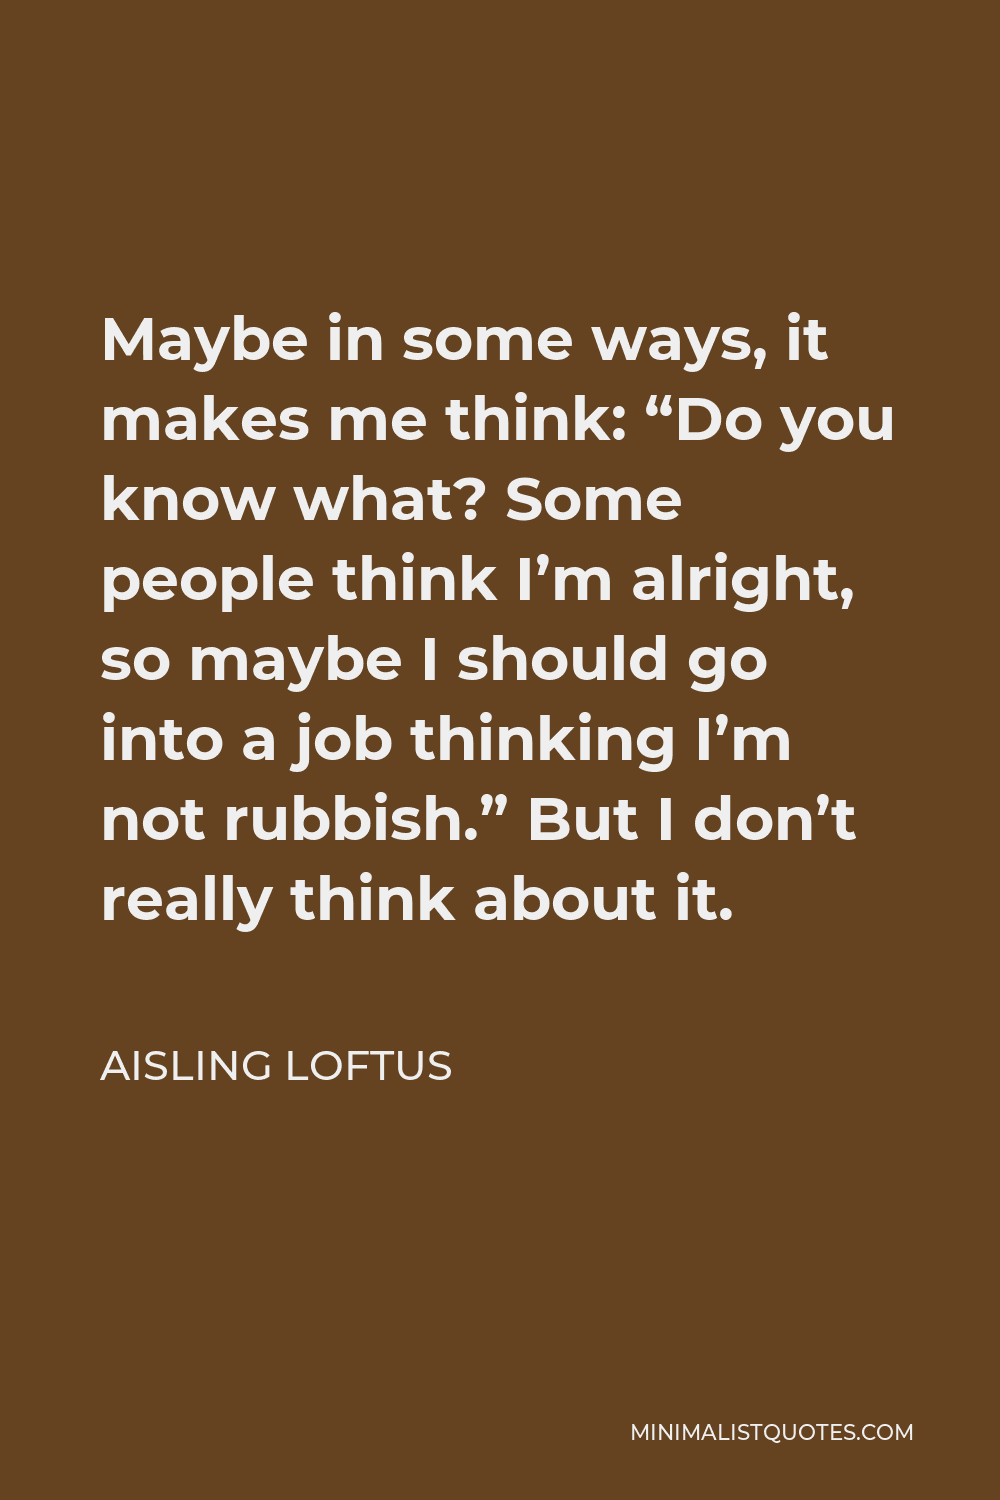 Aisling Loftus Quote - Maybe in some ways, it makes me think: “Do you know what? Some people think I’m alright, so maybe I should go into a job thinking I’m not rubbish.” But I don’t really think about it.